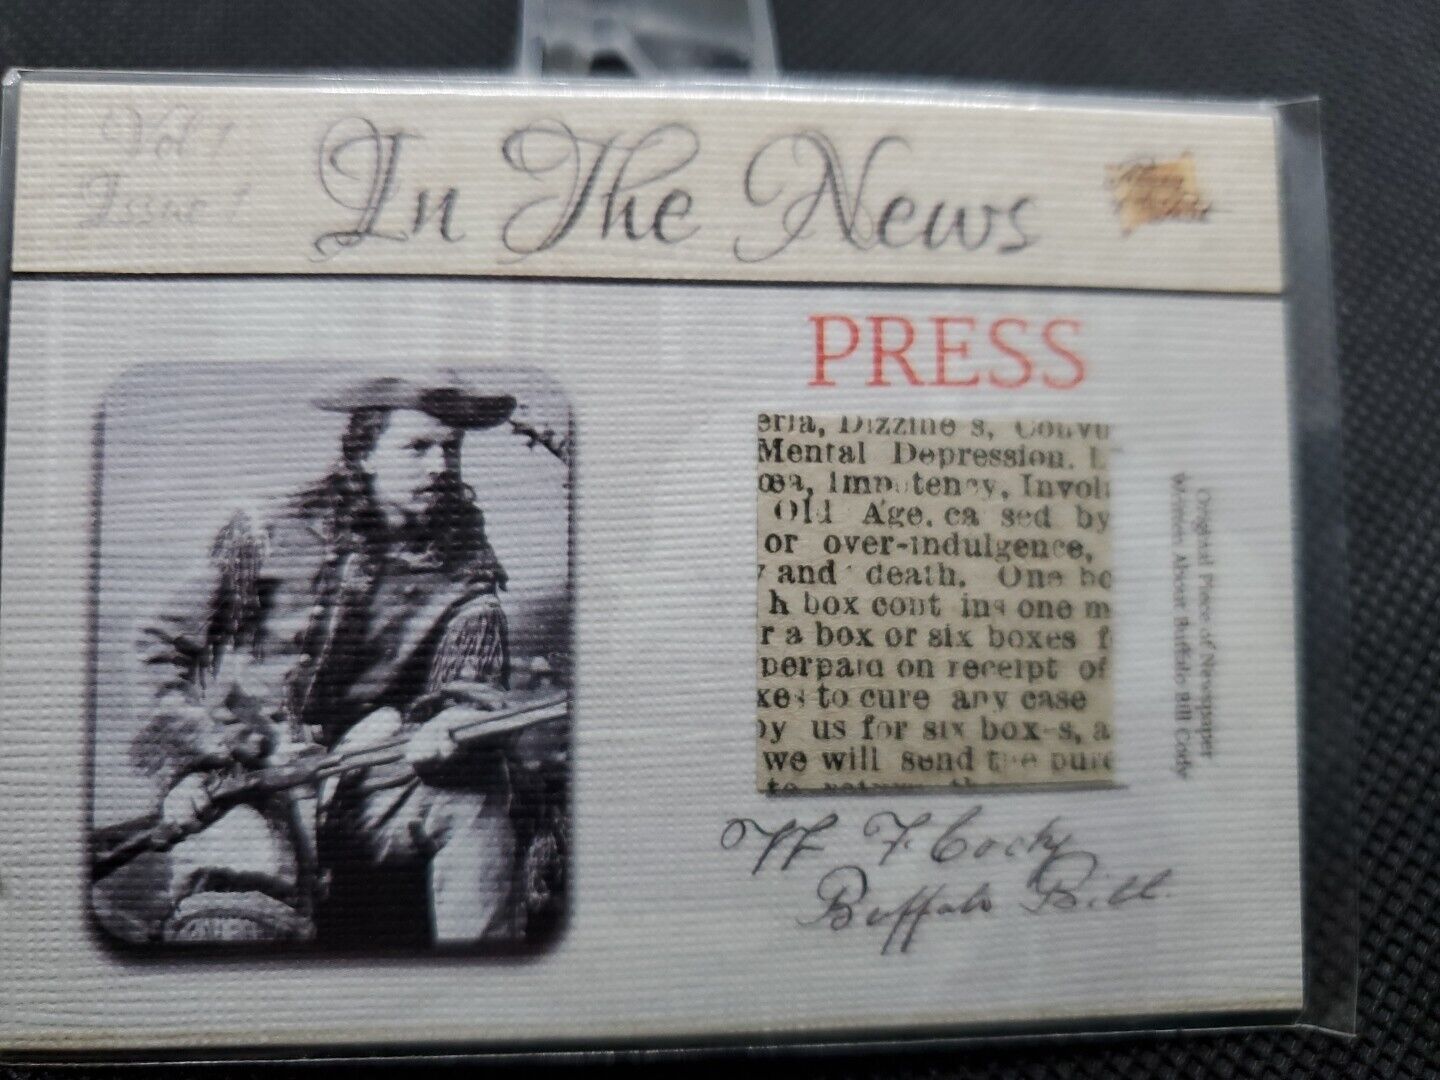 2018 THE BAR PIECES OF THE PAST IN THE NEWS PRESS BUFFALO BILL CODY RELIC